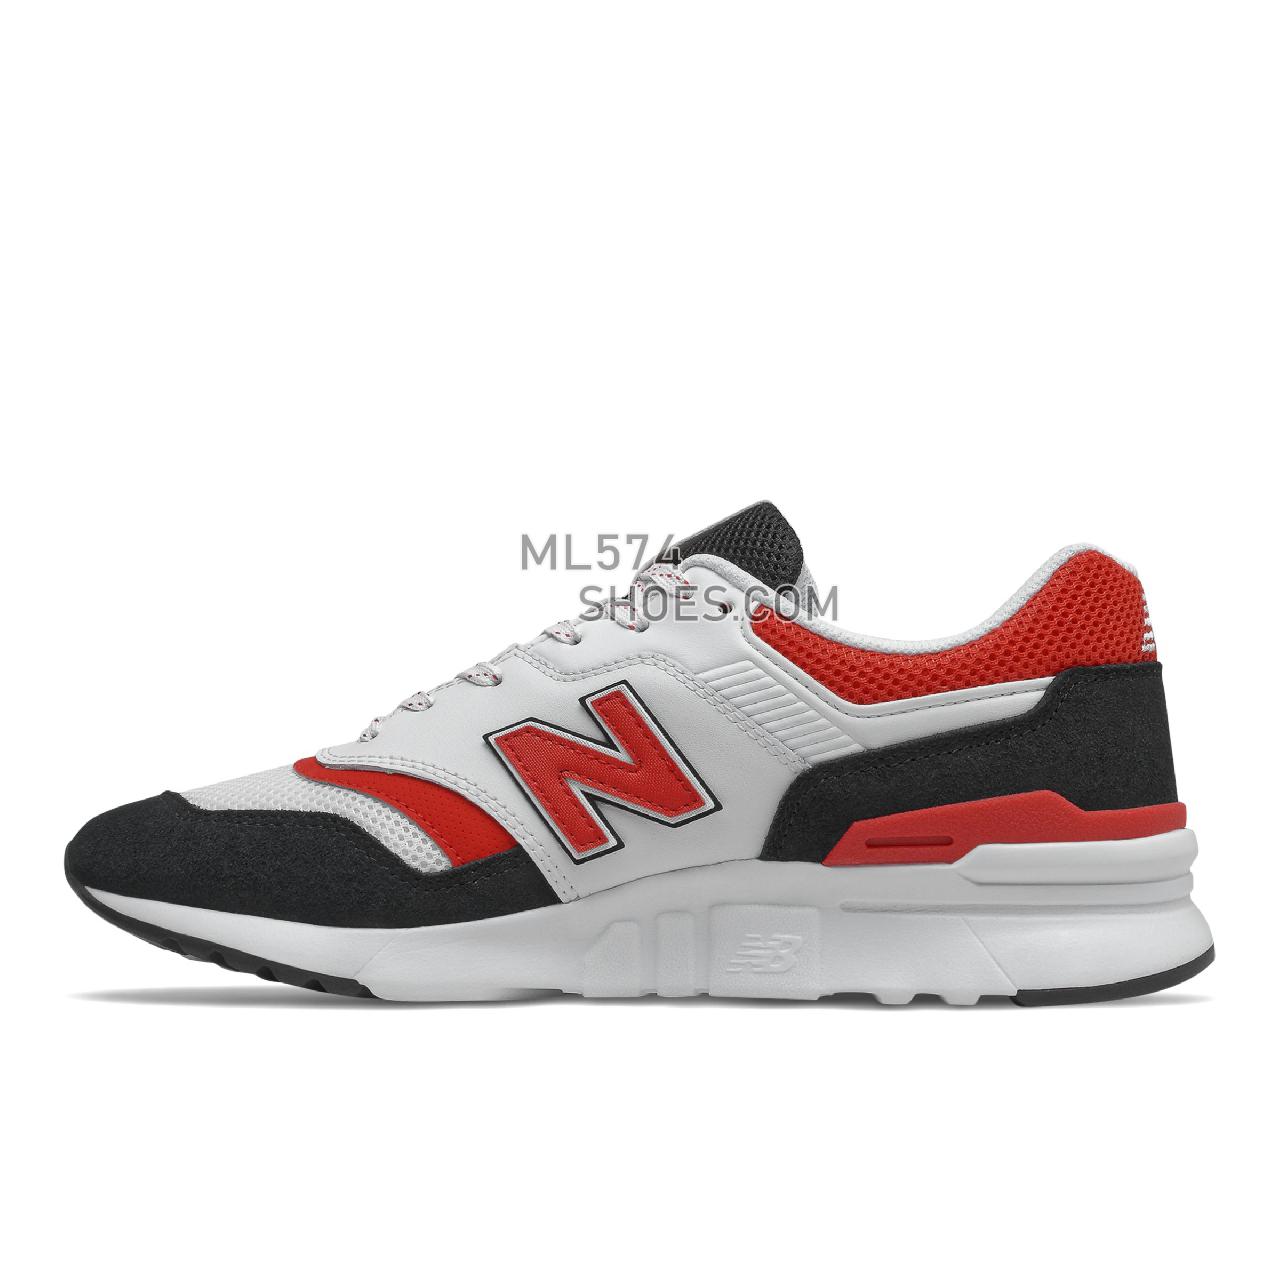 New Balance 997H - Men's Classic Sneakers - White with Black - CM997HPD